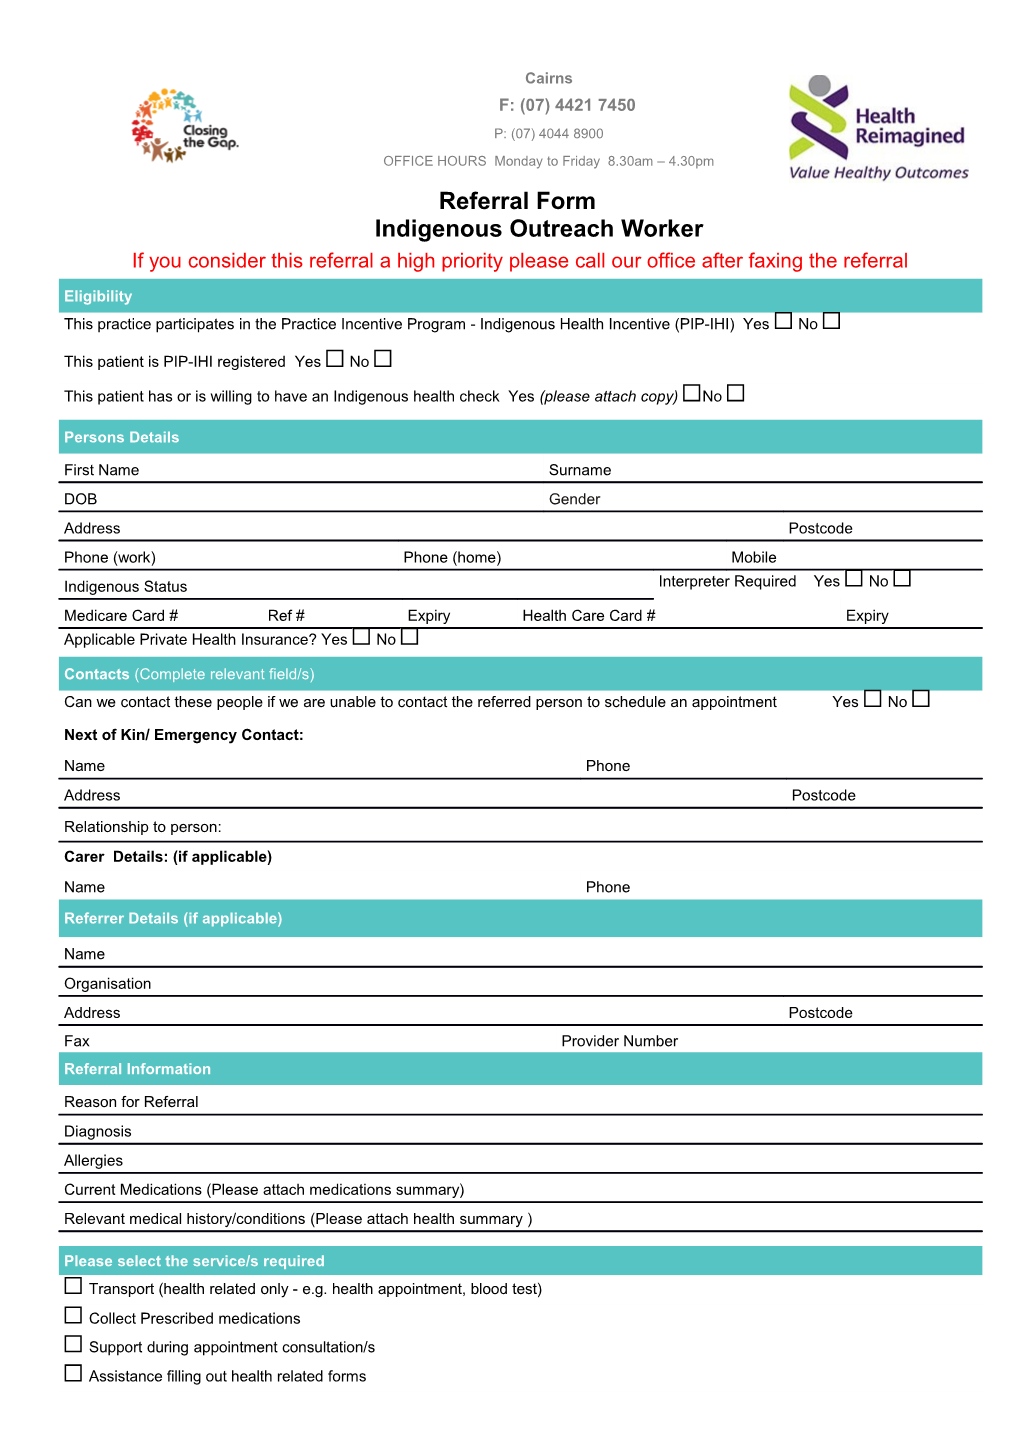 Referral Form Indigenous Outreach Worker